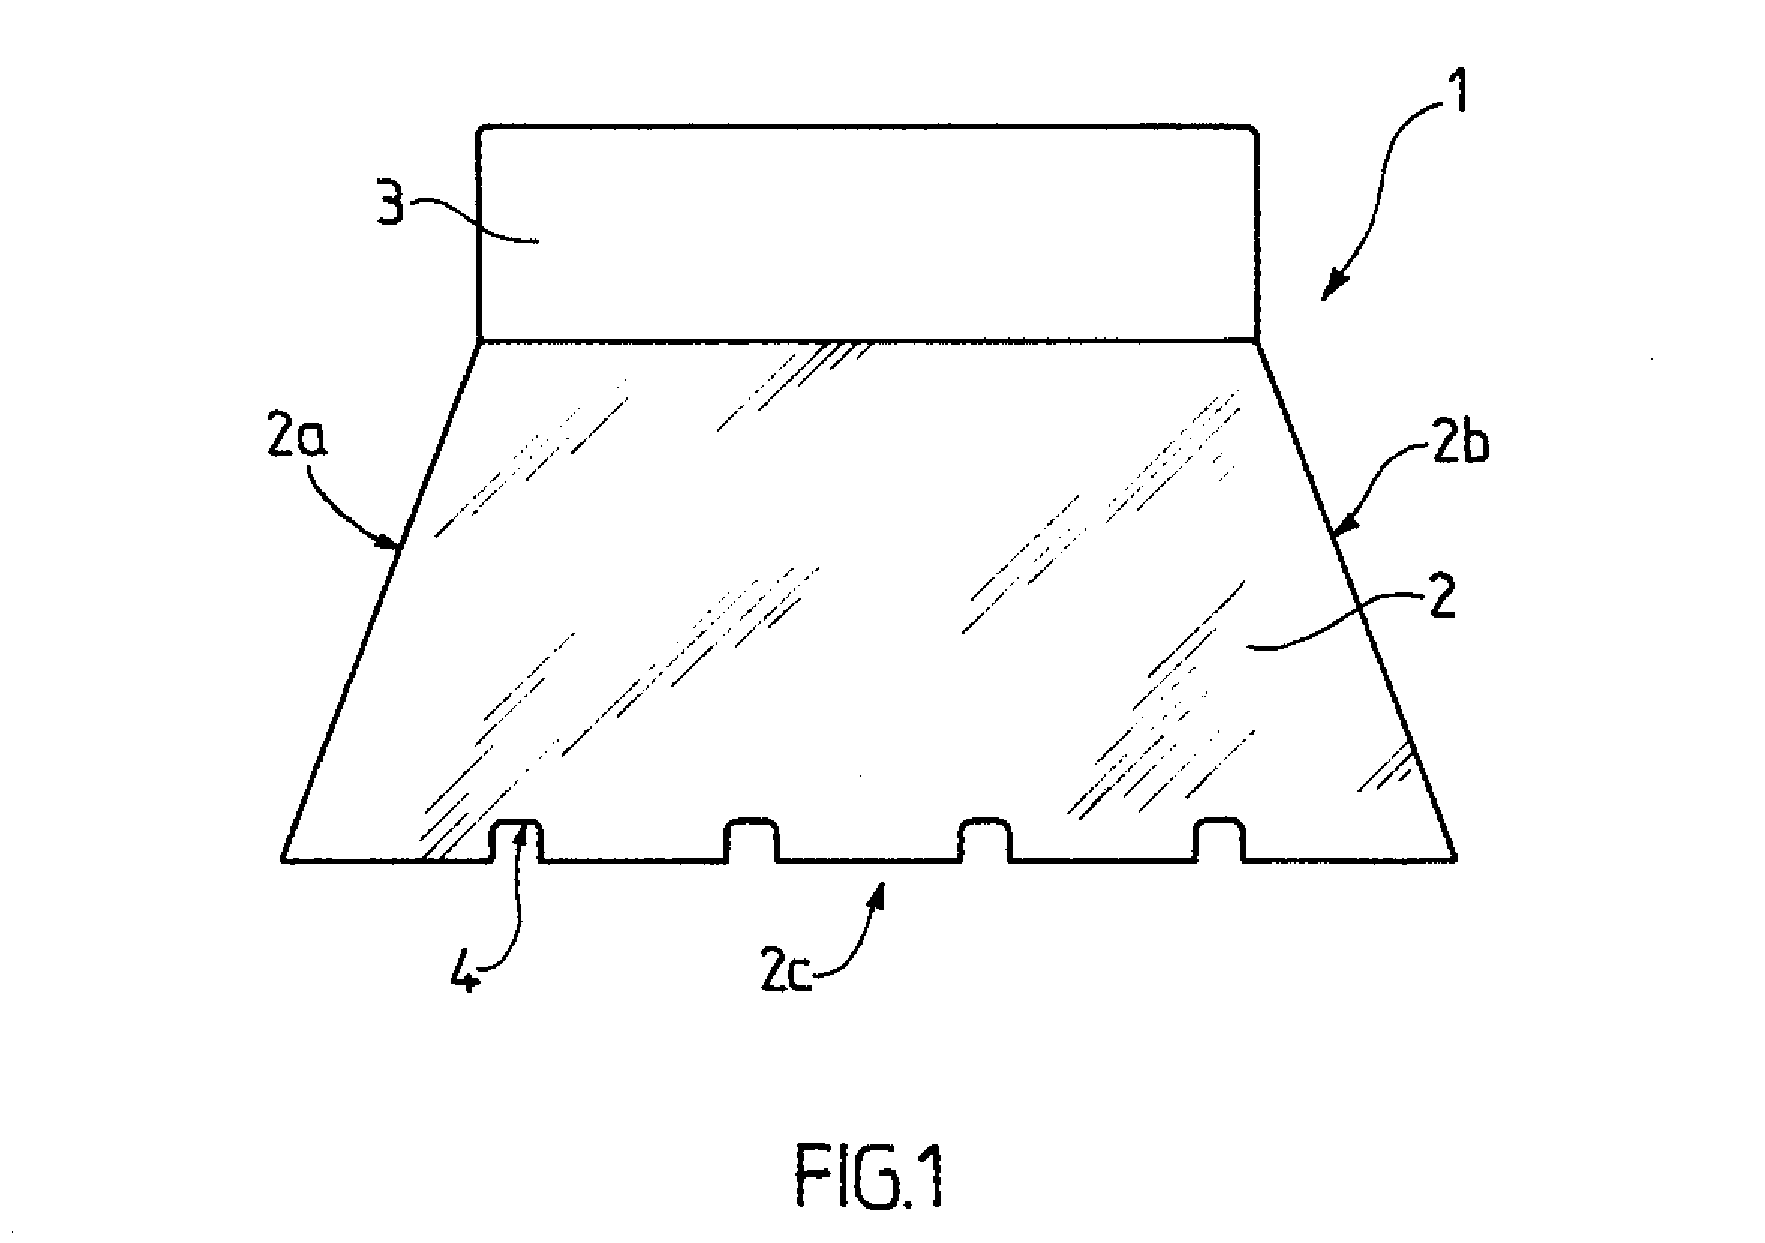 Notched spatula applicator and adhesive composition for laying parquet